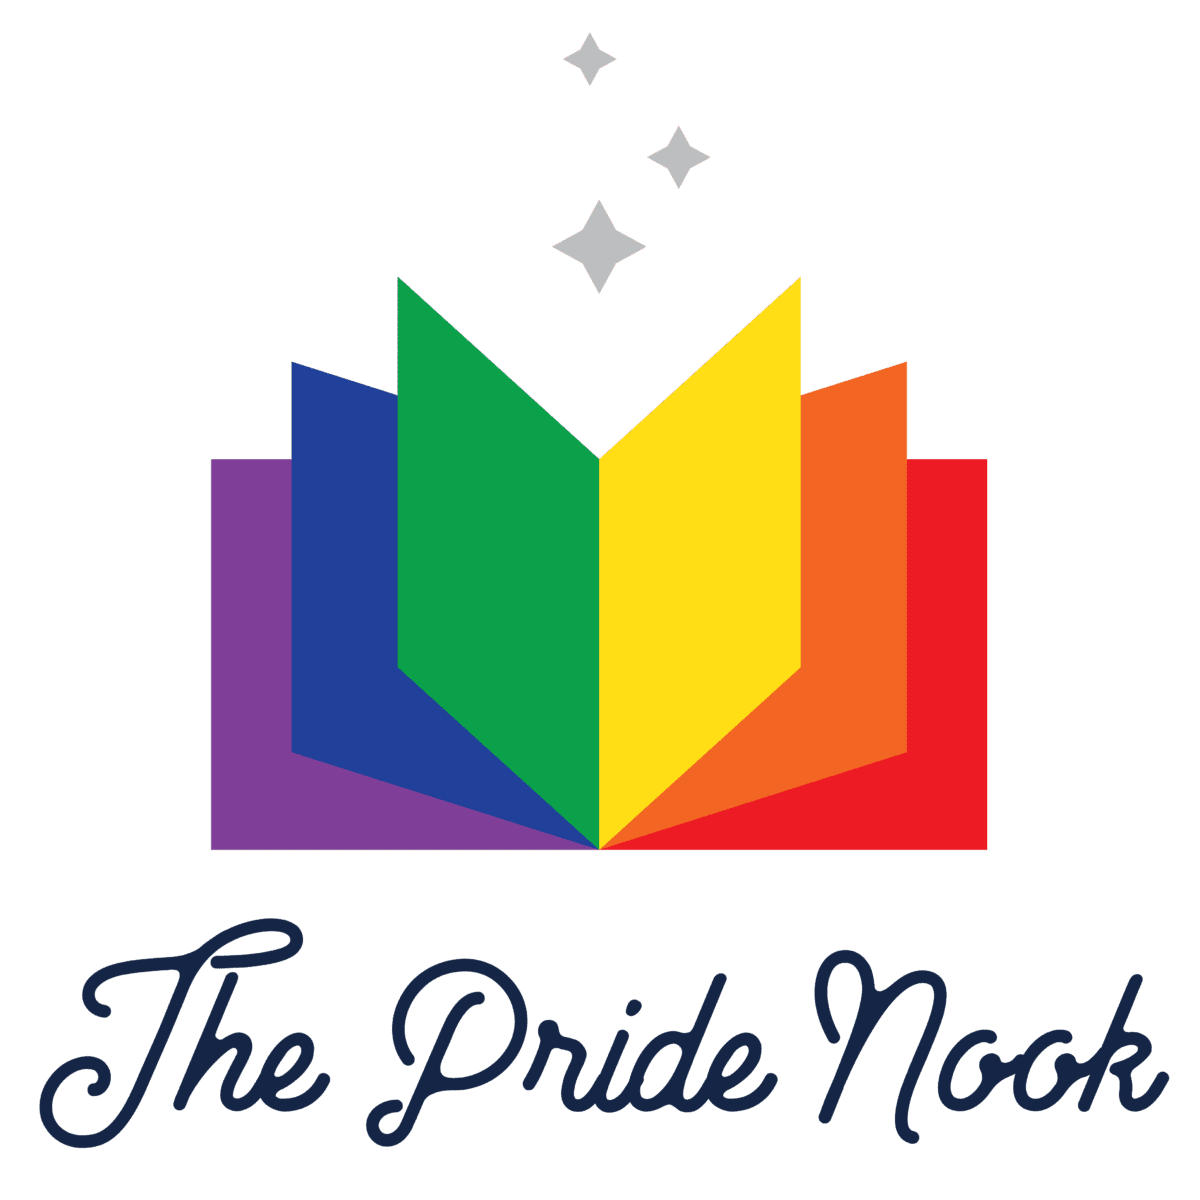 A logo of an open book with rainbow-colored pages and sparkles above it, accompanied by the text "The Pride Nook" in cursive at the bottom.